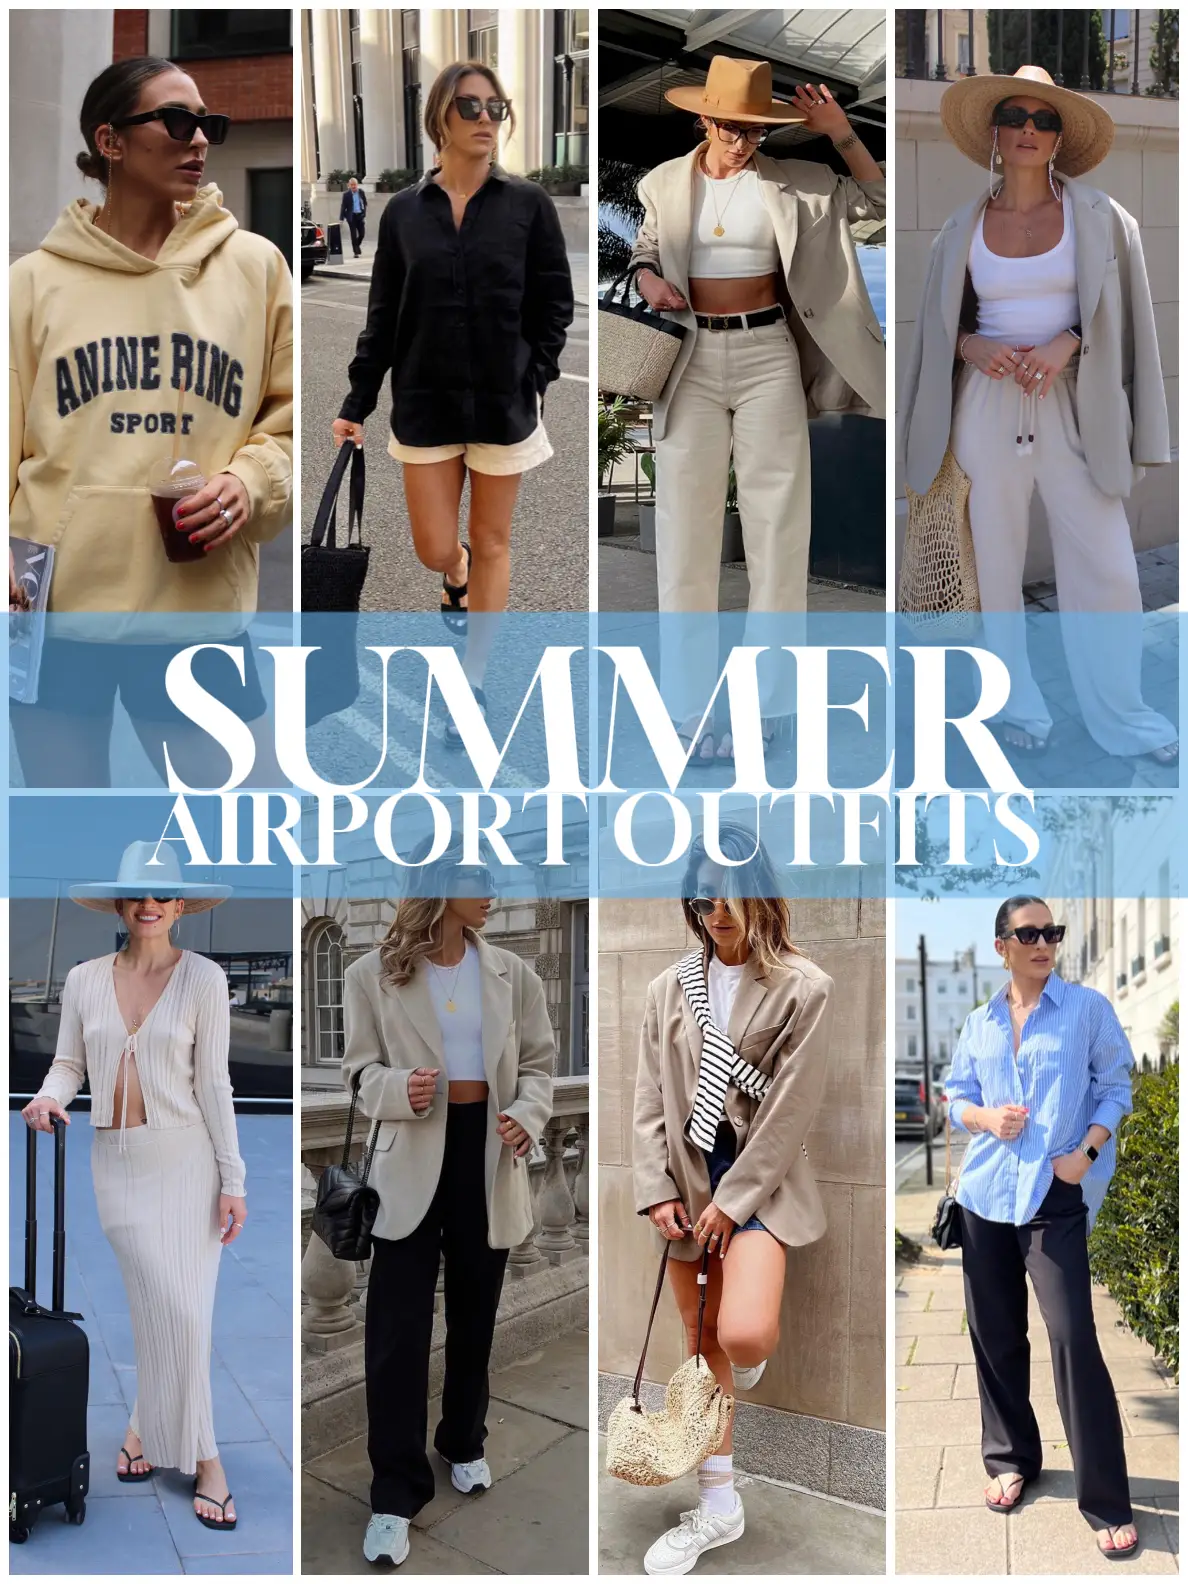 20 TRAVEL OUTFIT IDEAS, Casual Travel Fashion Lookbook, Spring Summer  Airport